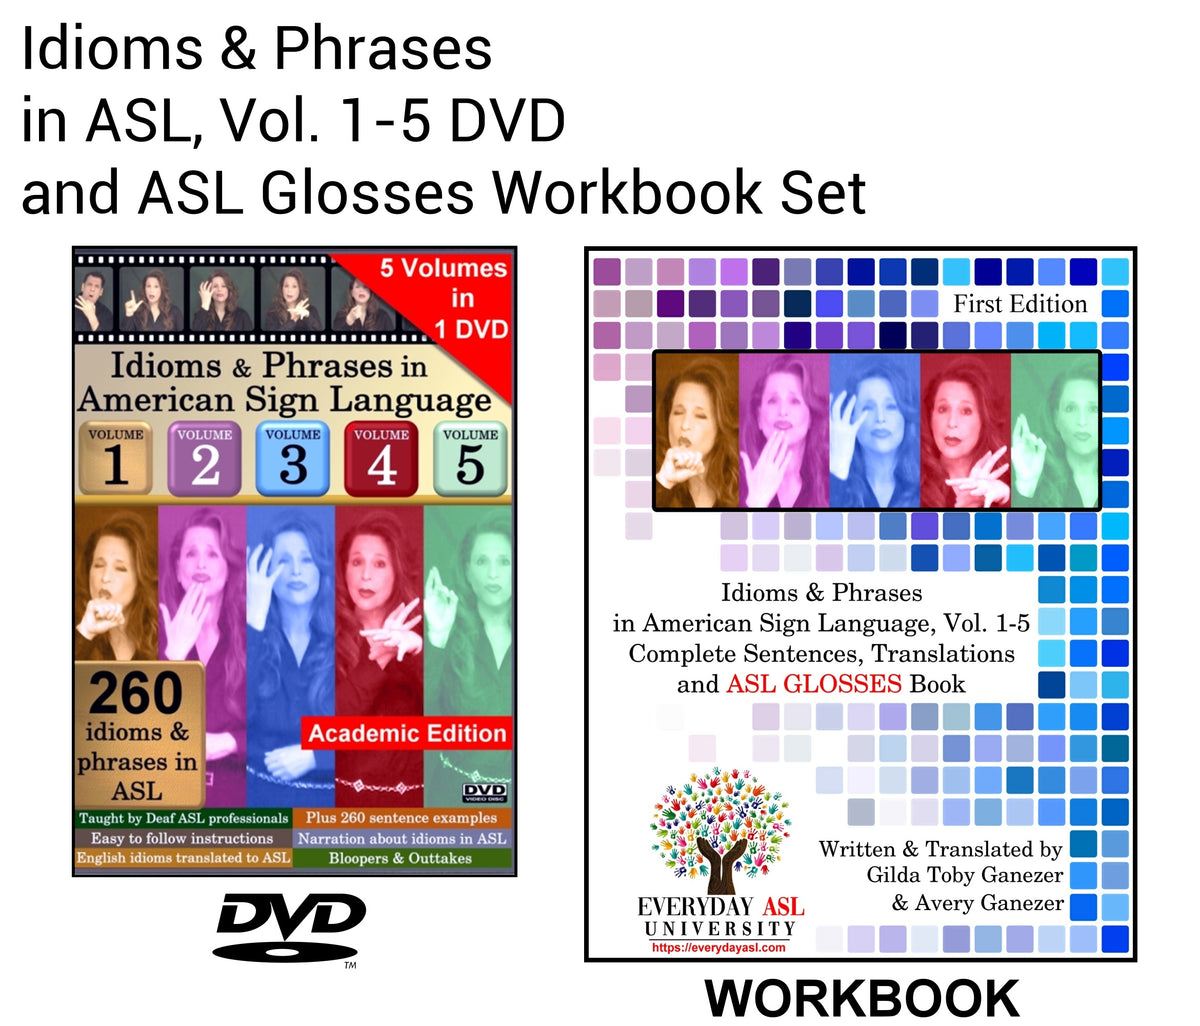 New Idioms And Phrases In Asl Vol 1 5 Dvd And Asl Glosses Workbook Set Everyday Asl University 3893